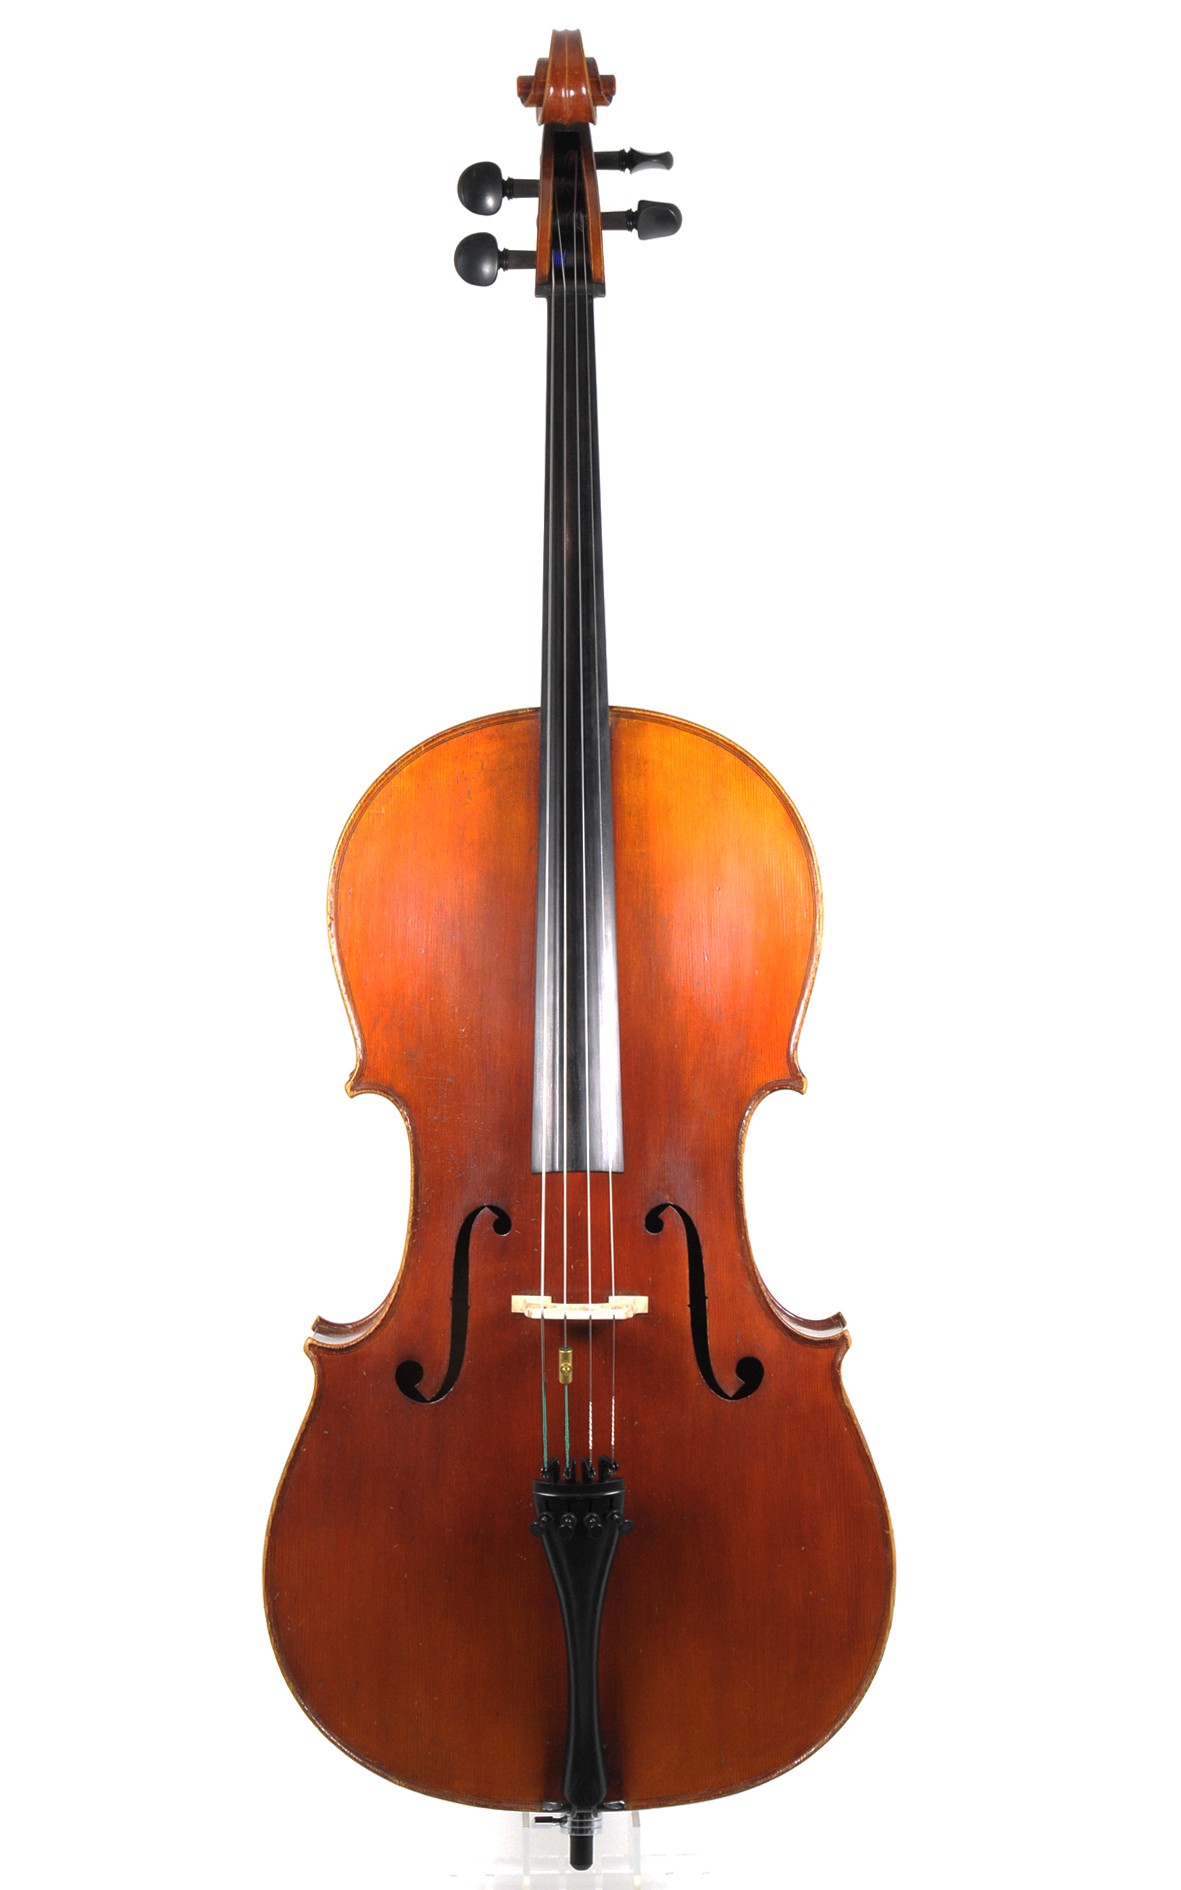 Mittenwald cello from the Eugen Gärtner collection